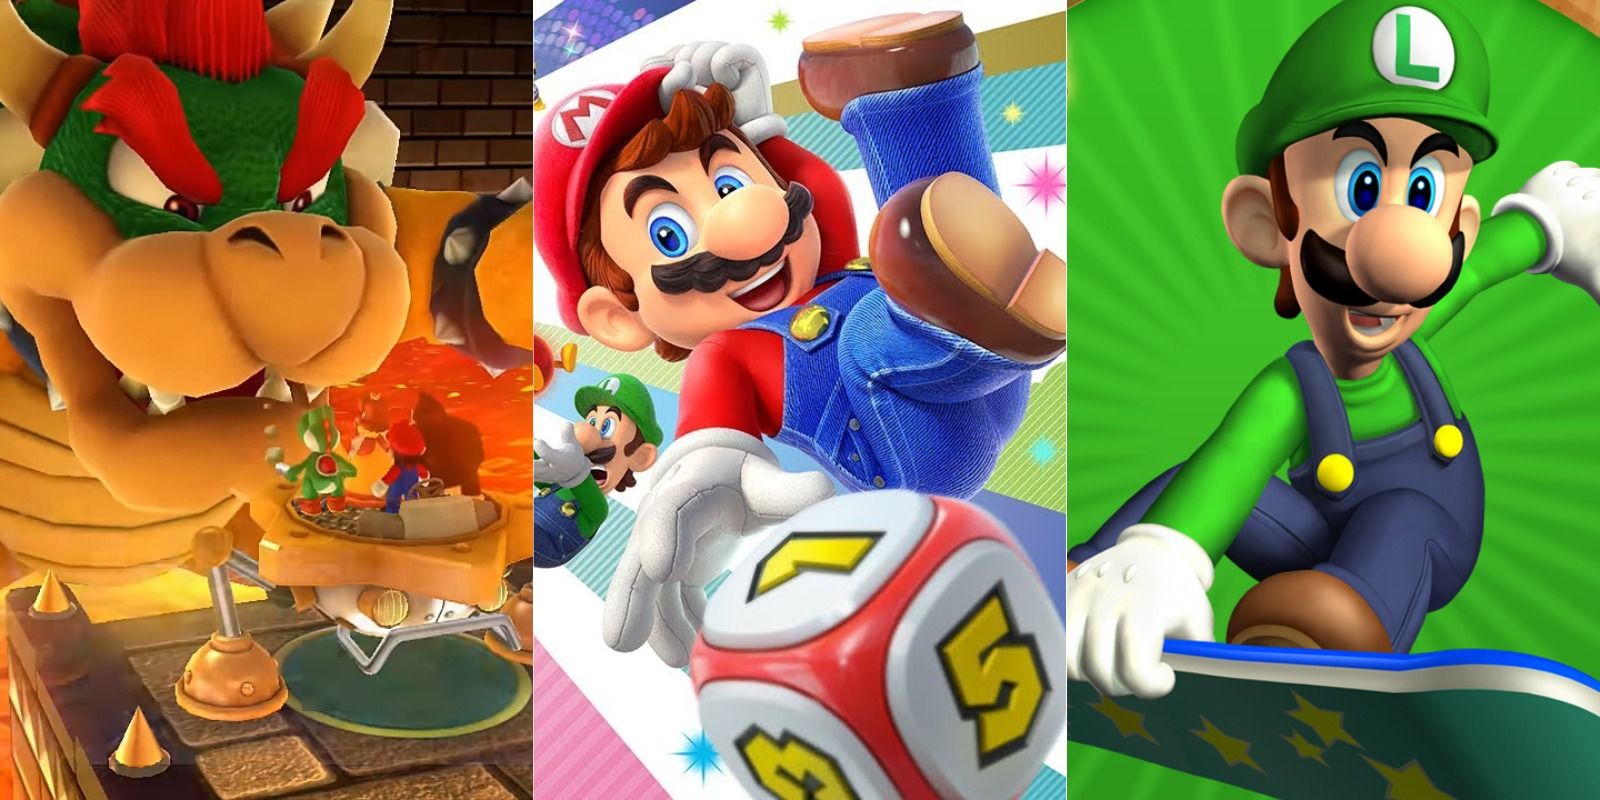 A collage of Bowser, Mario and Luigi in Mario party games